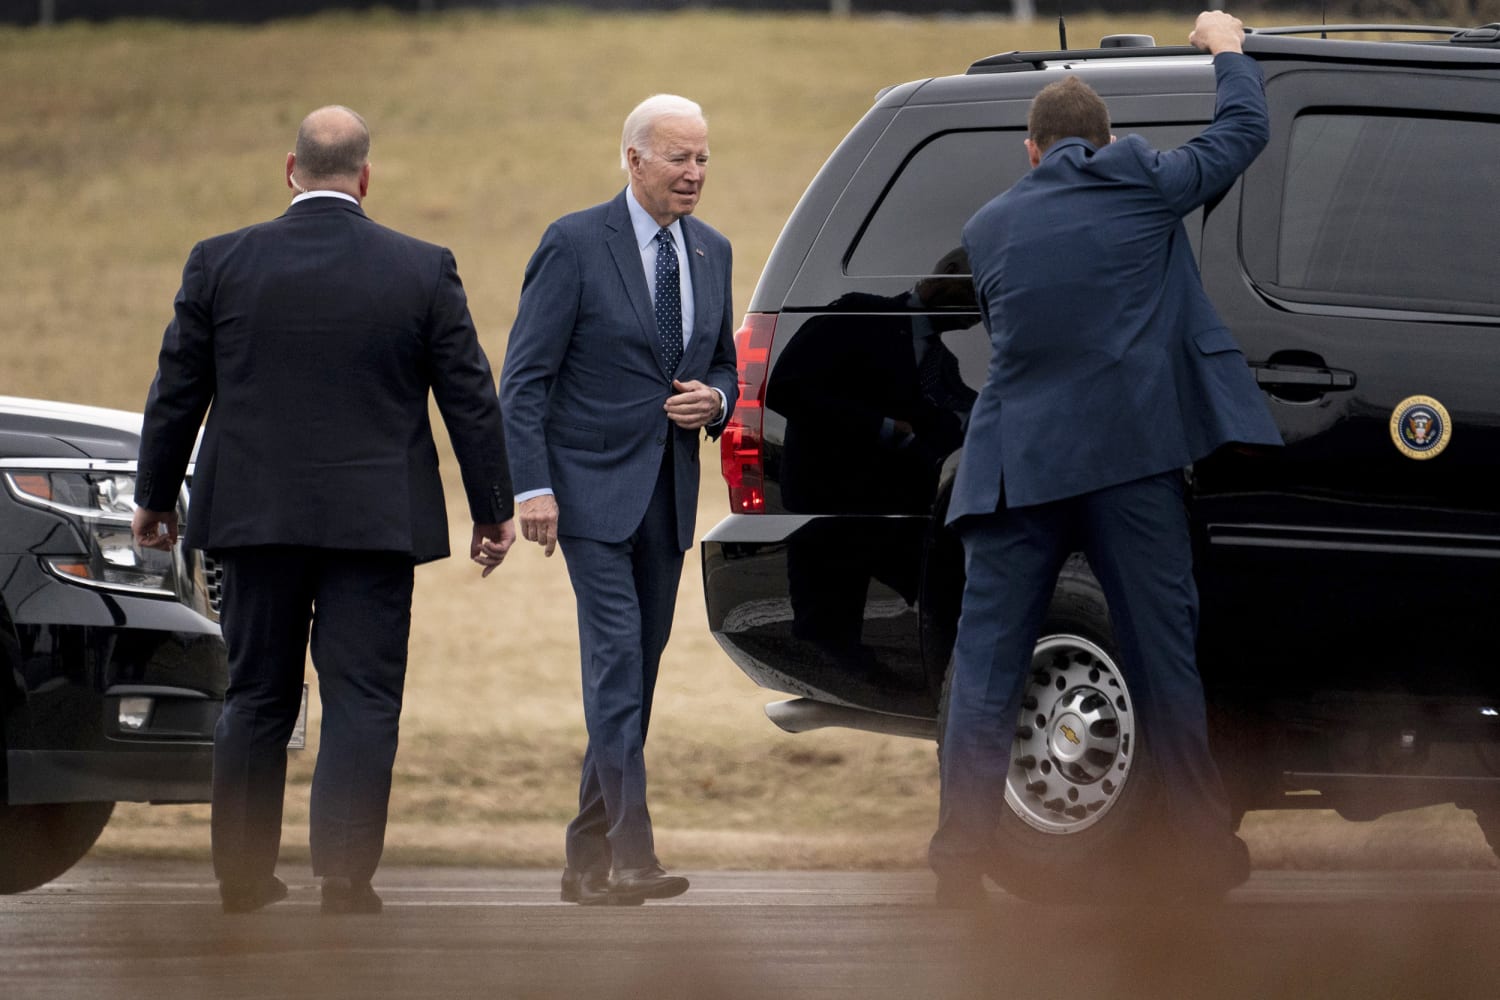 White House physician says lesion removed during Biden's physical was cancerous, but no further treatment needed